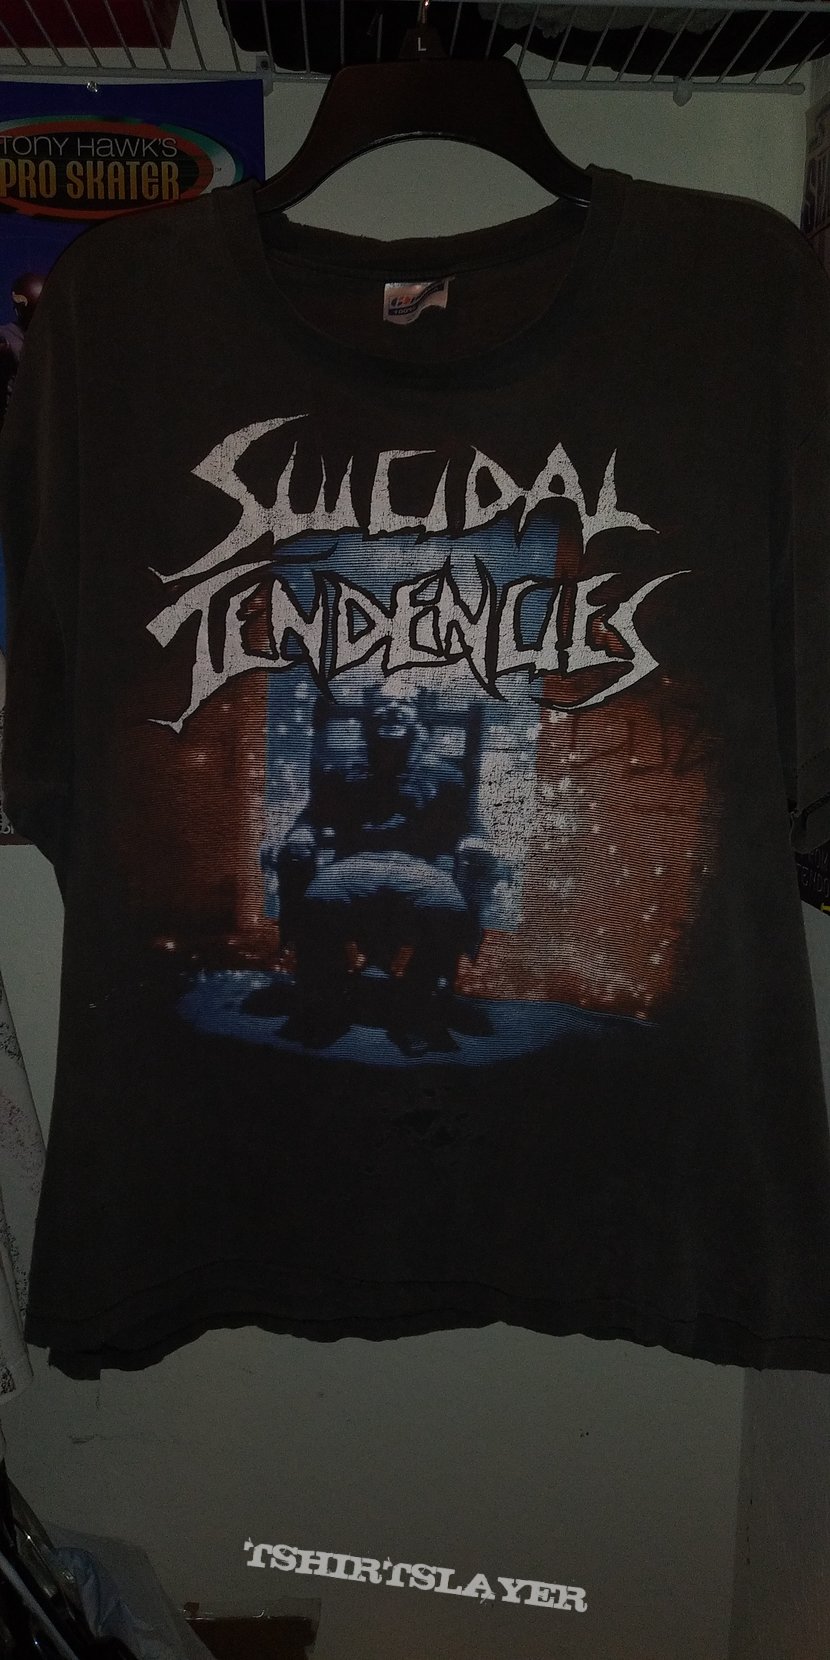 Suicidal tendencies - you cant bring me down tour